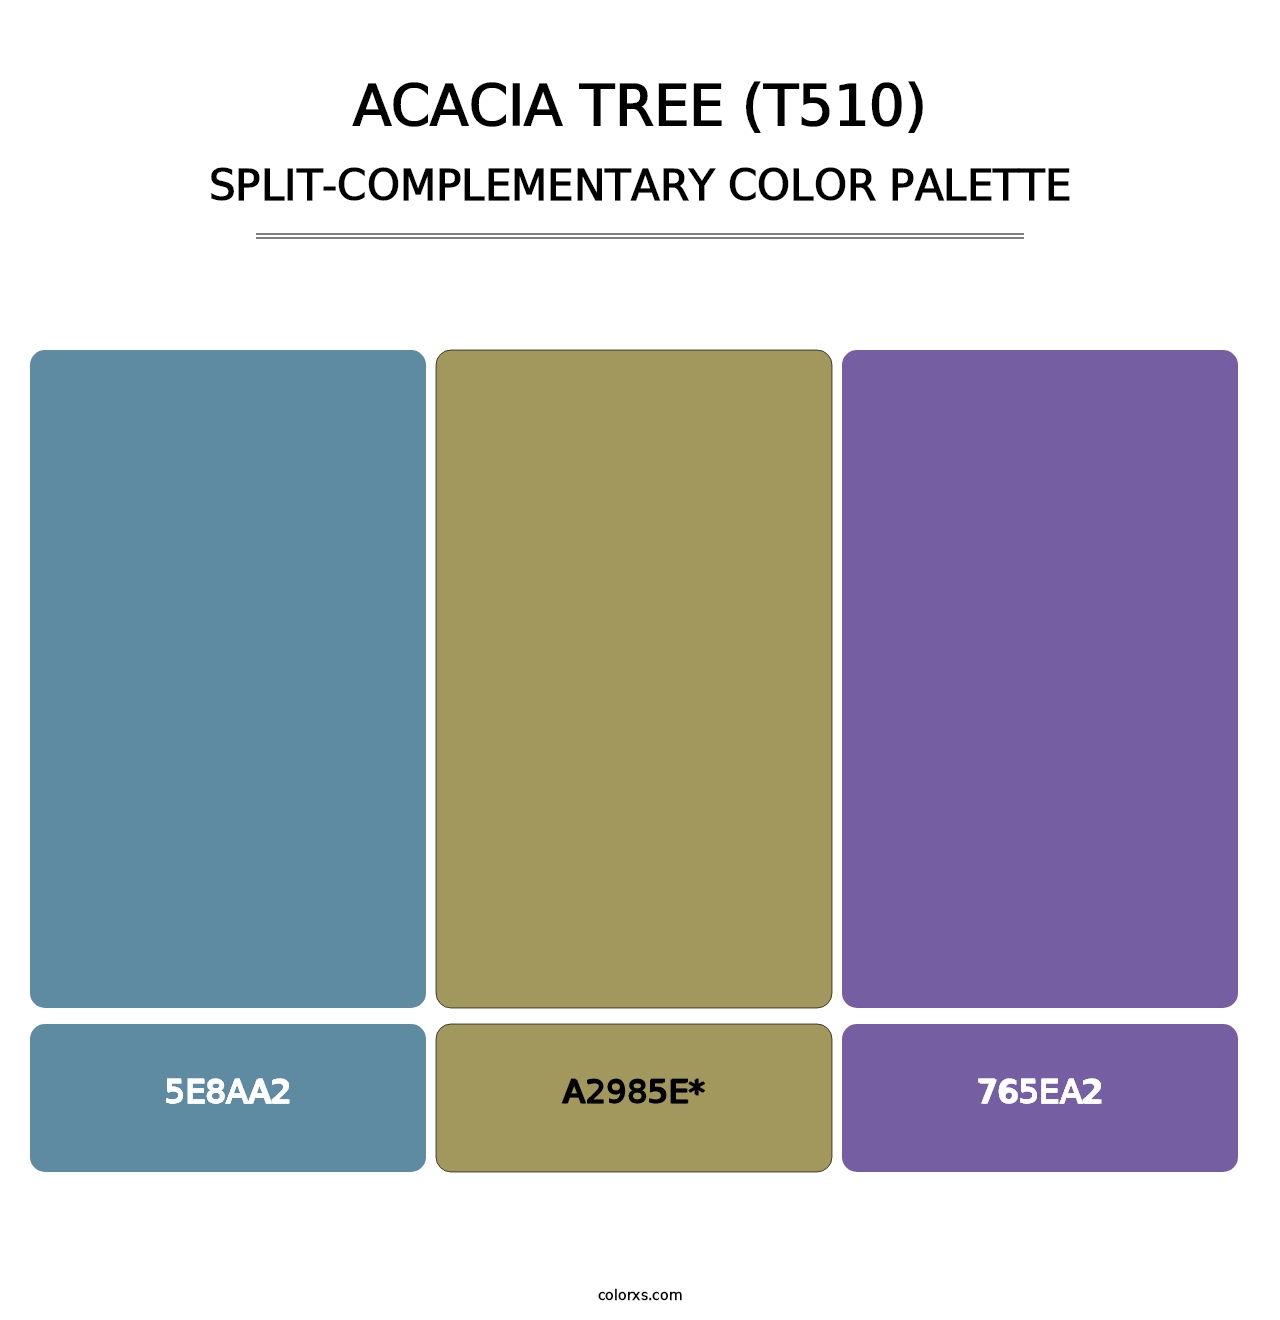 Acacia Tree (T510) - Split-Complementary Color Palette